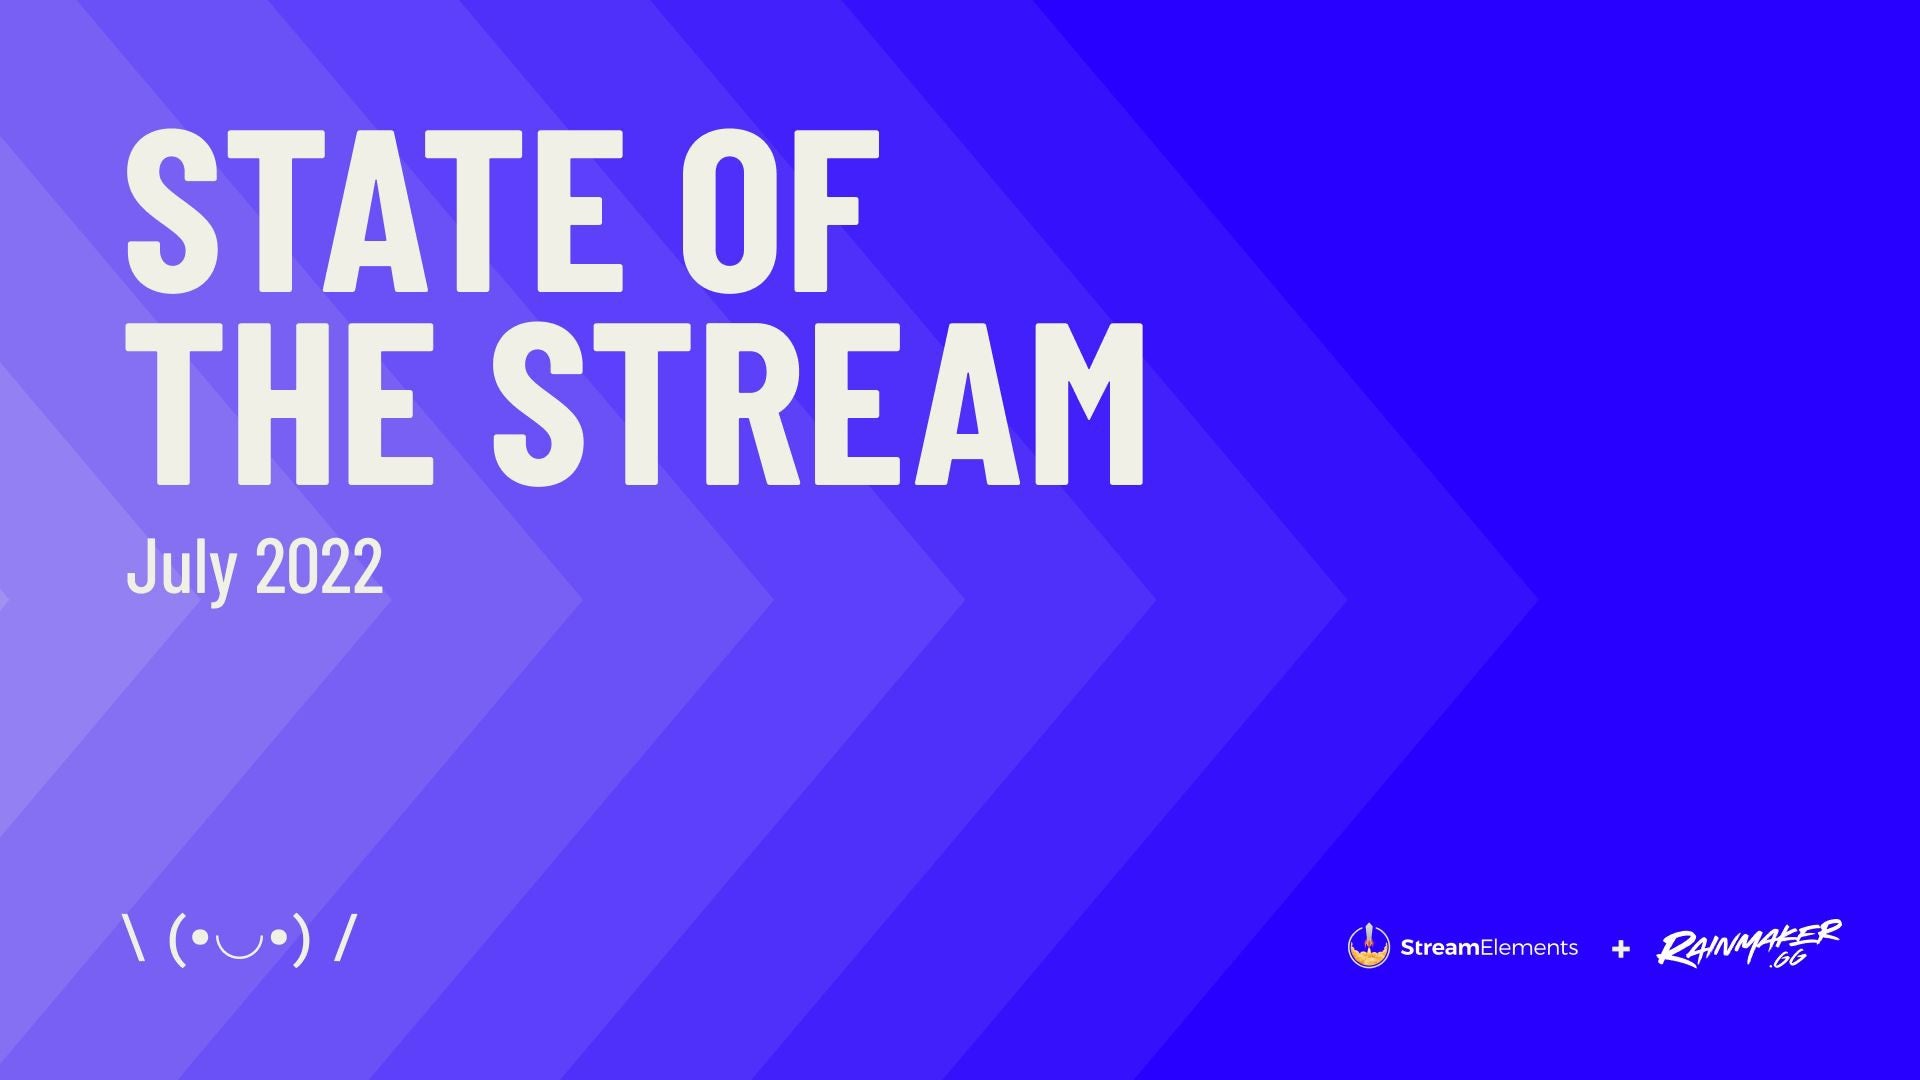 Image for Twitch amassed 1.7bn hours watched during July